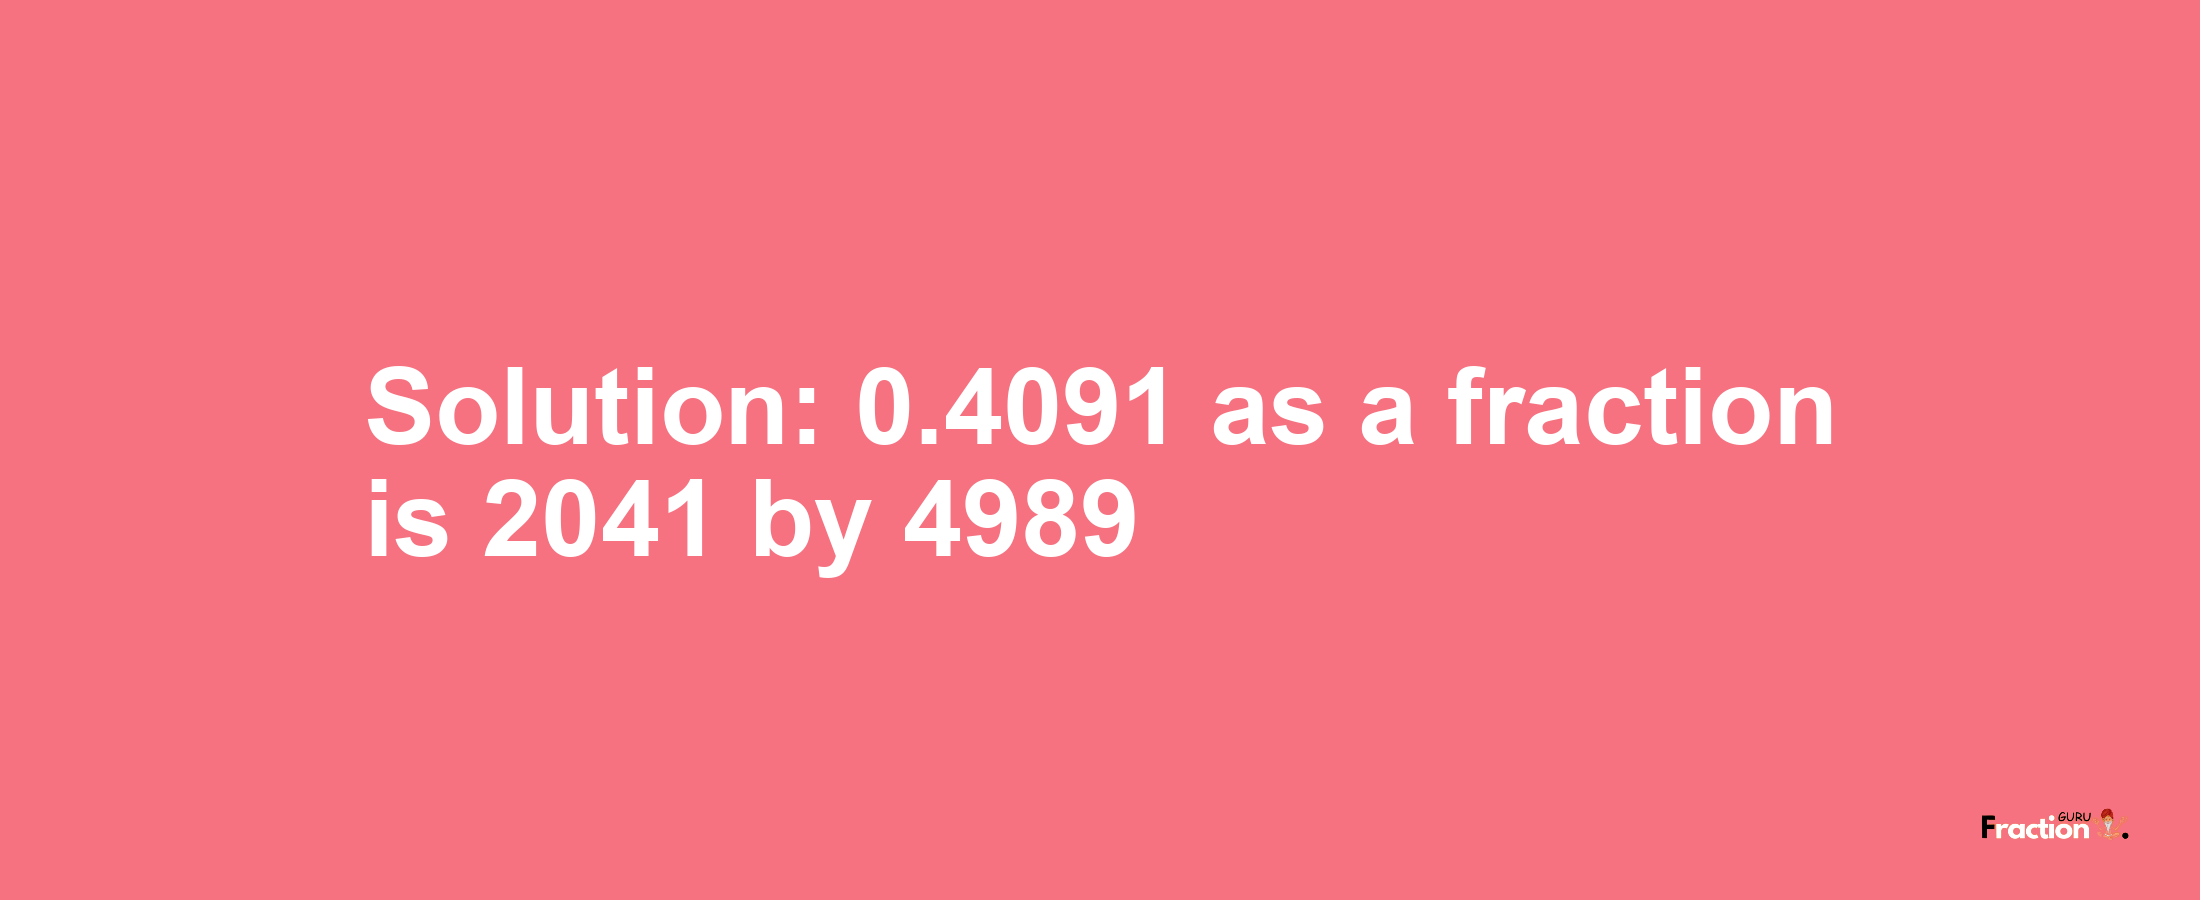 Solution:0.4091 as a fraction is 2041/4989